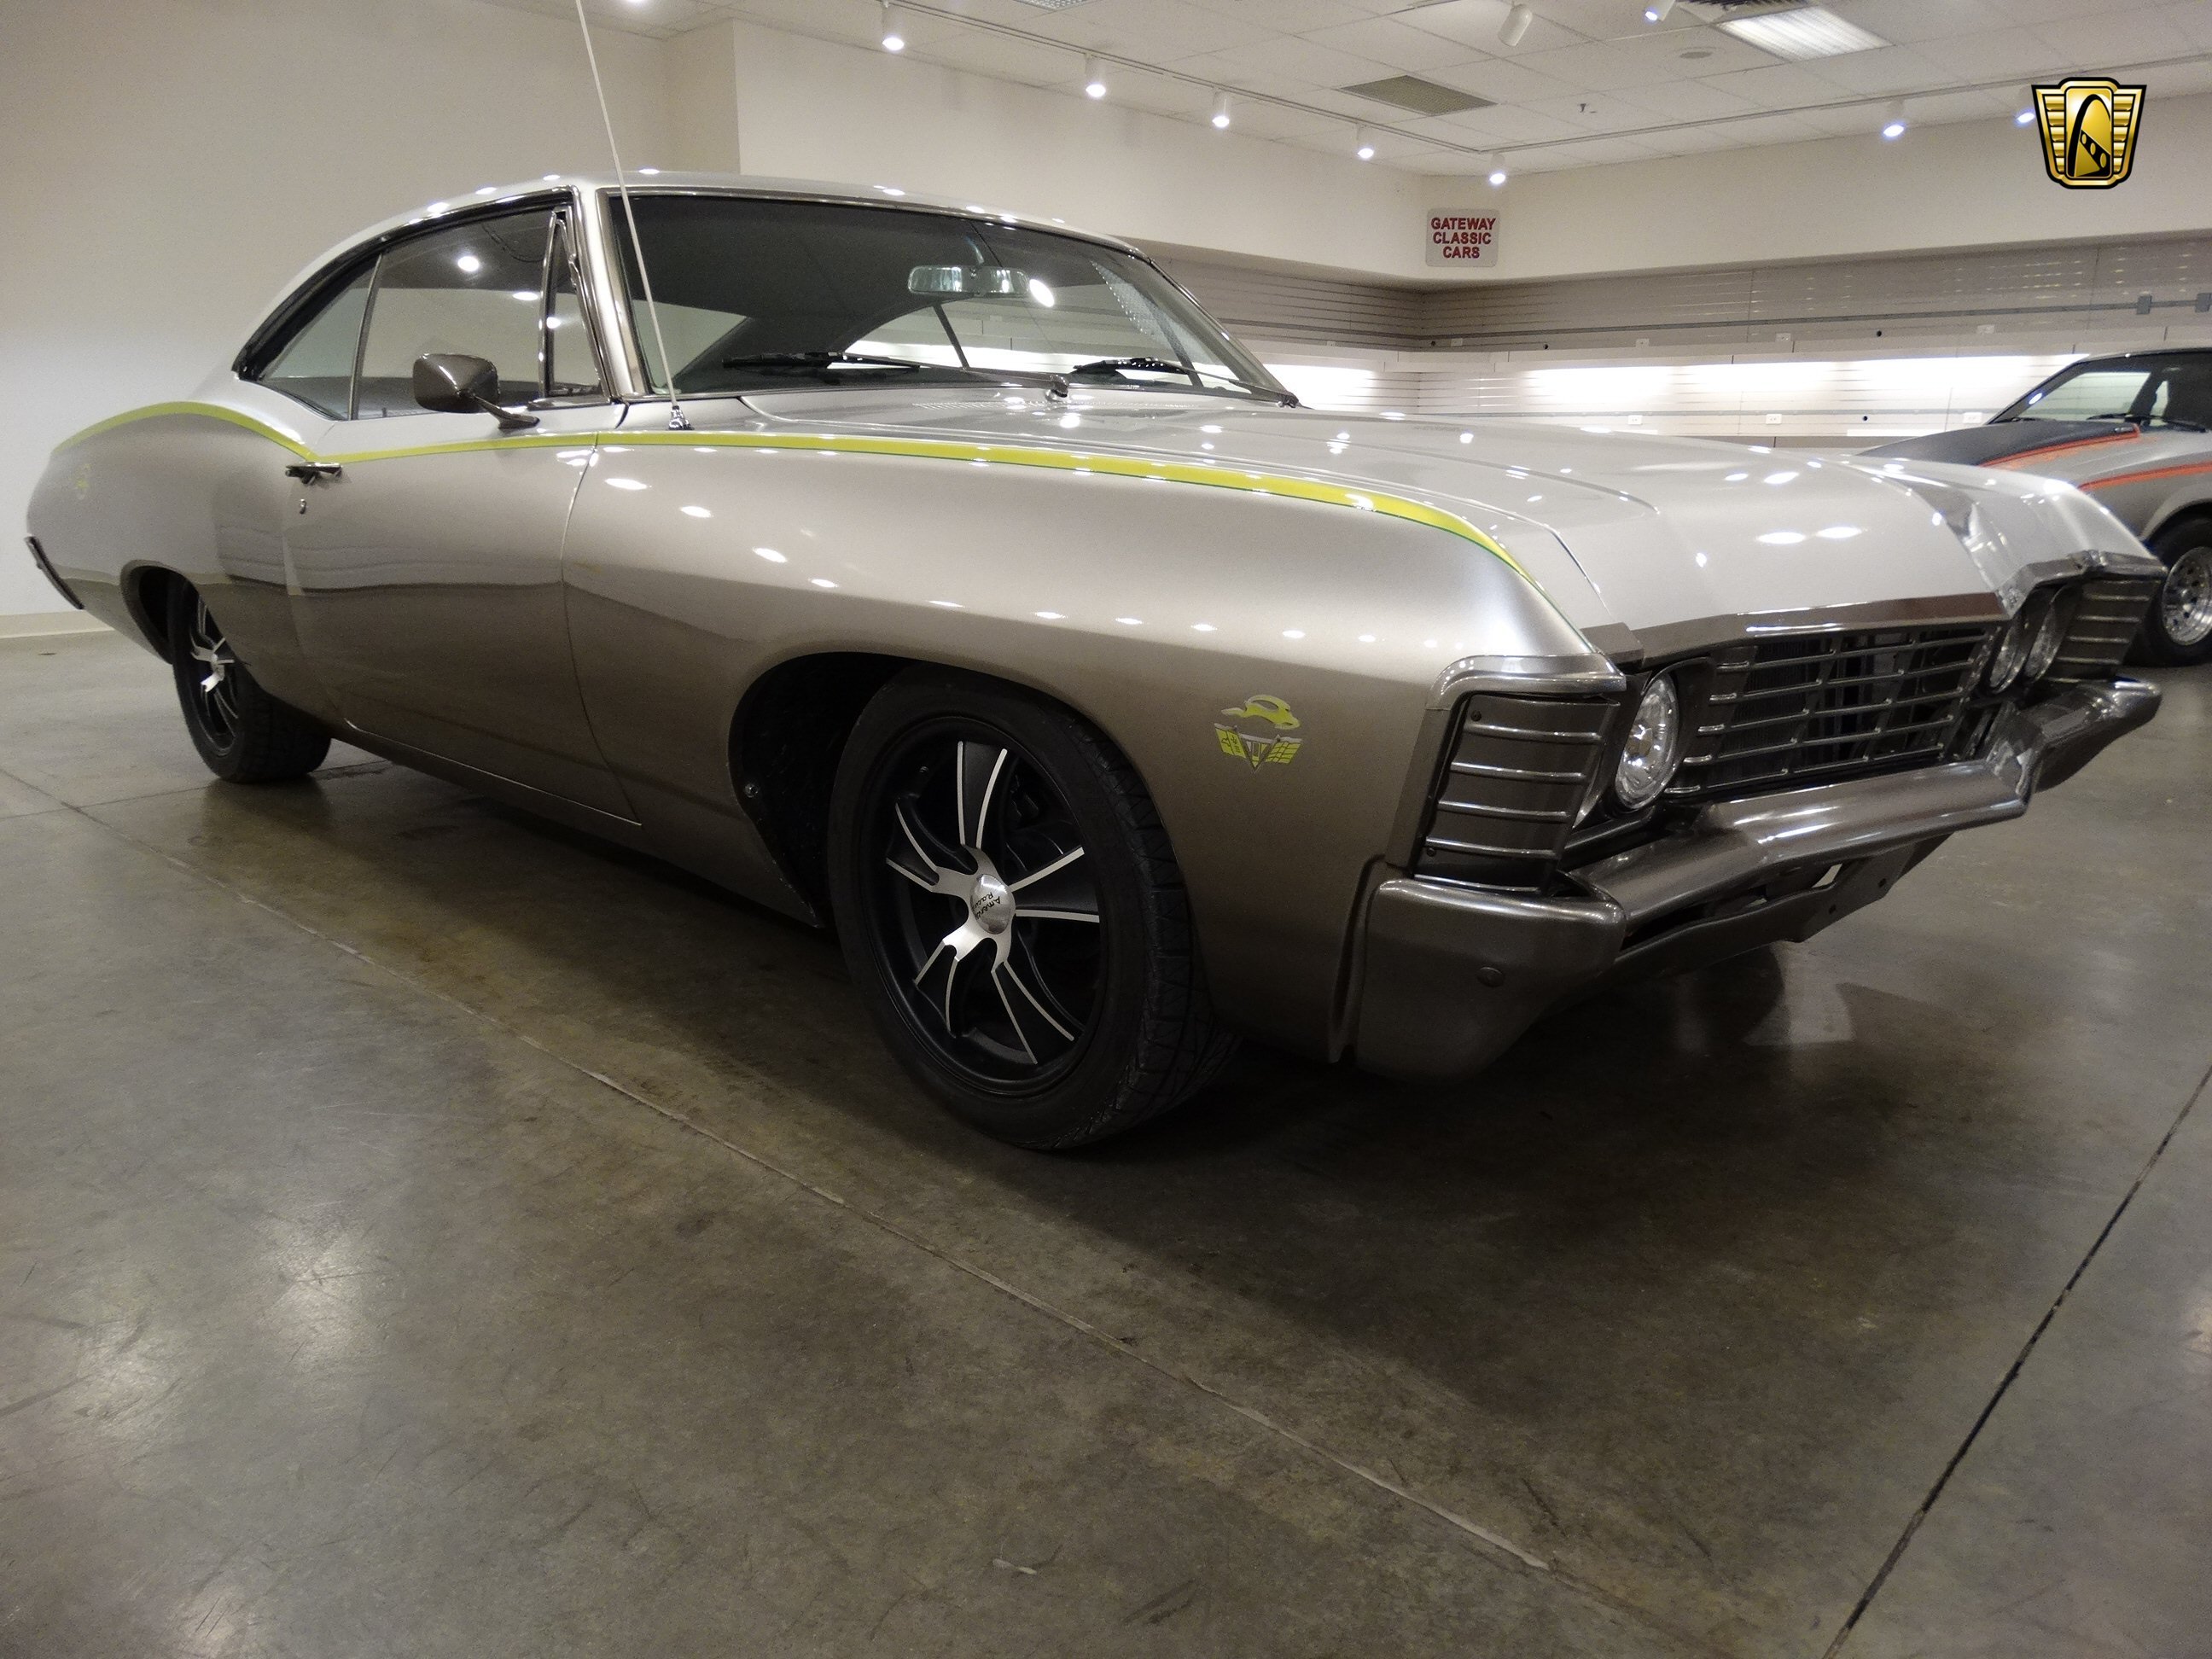 1967, Chevrolet, Impala, Ss, Cars Wallpapers HD / Desktop and Mobile